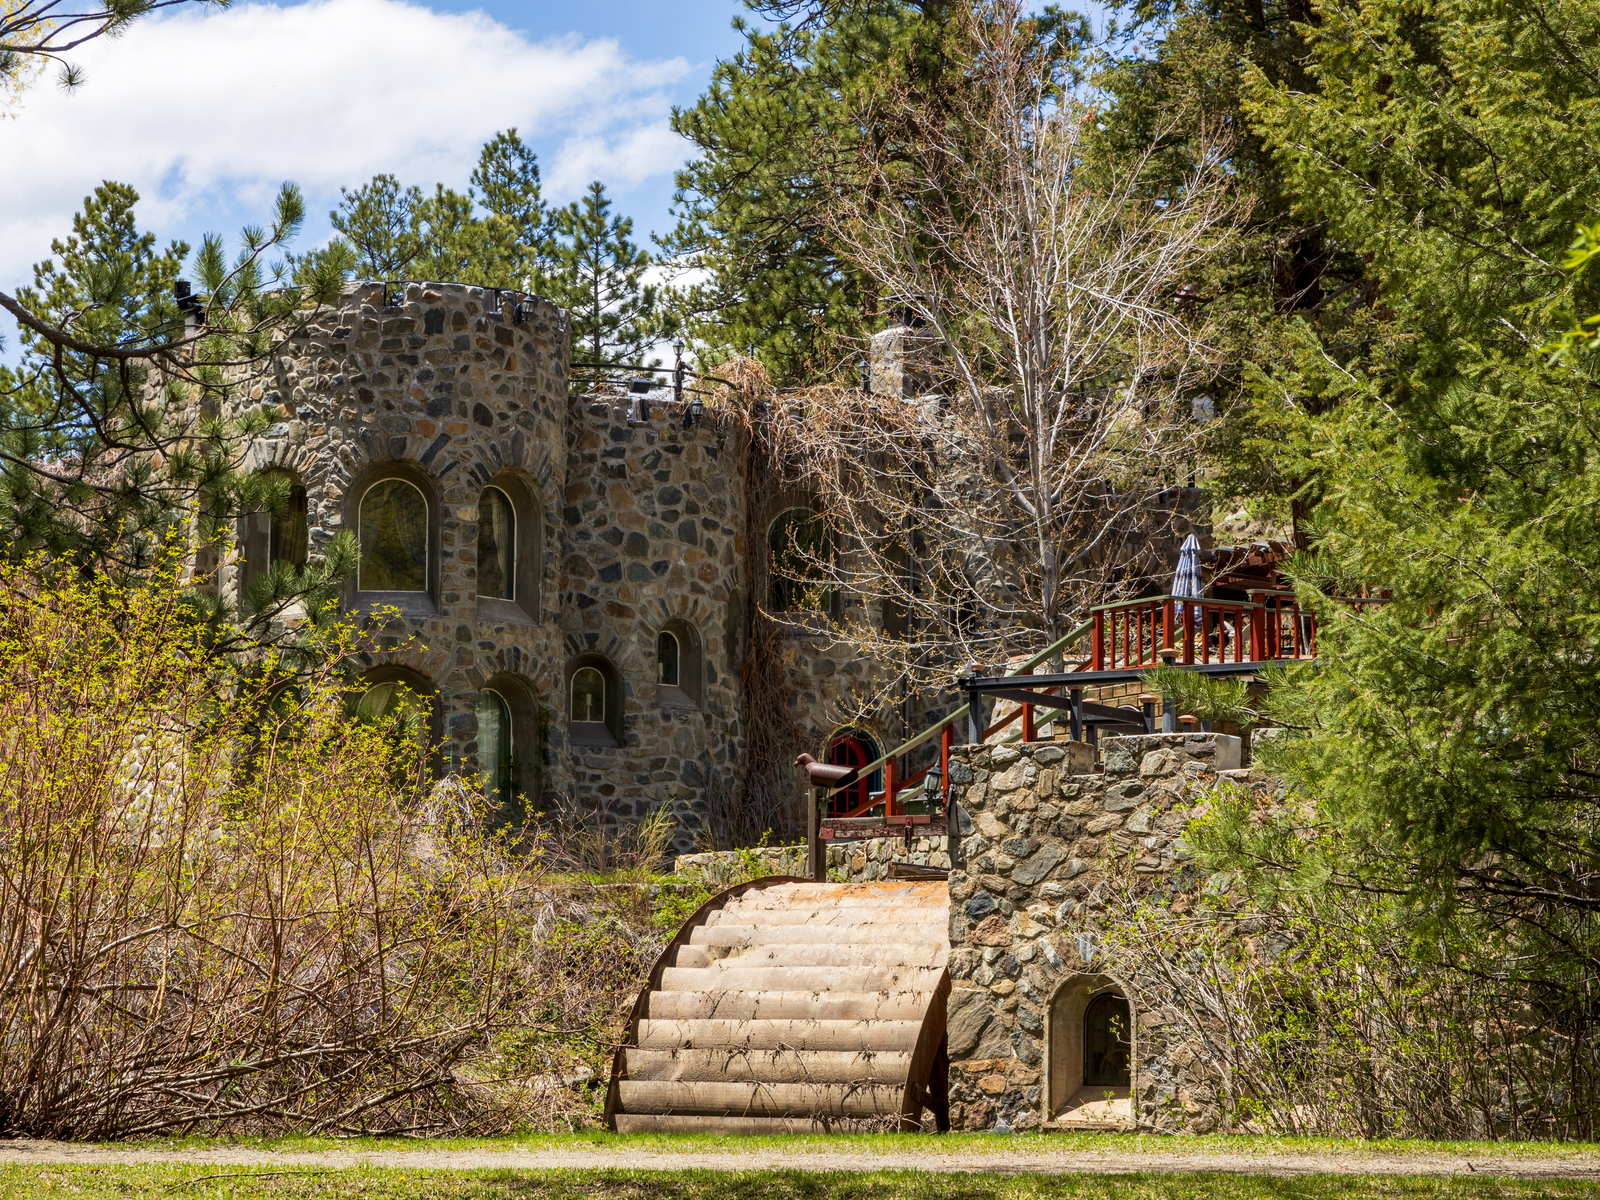 An attraction at one of the best hikes near Denver during spring, Dunafon Castle in Lair o the Bear Park